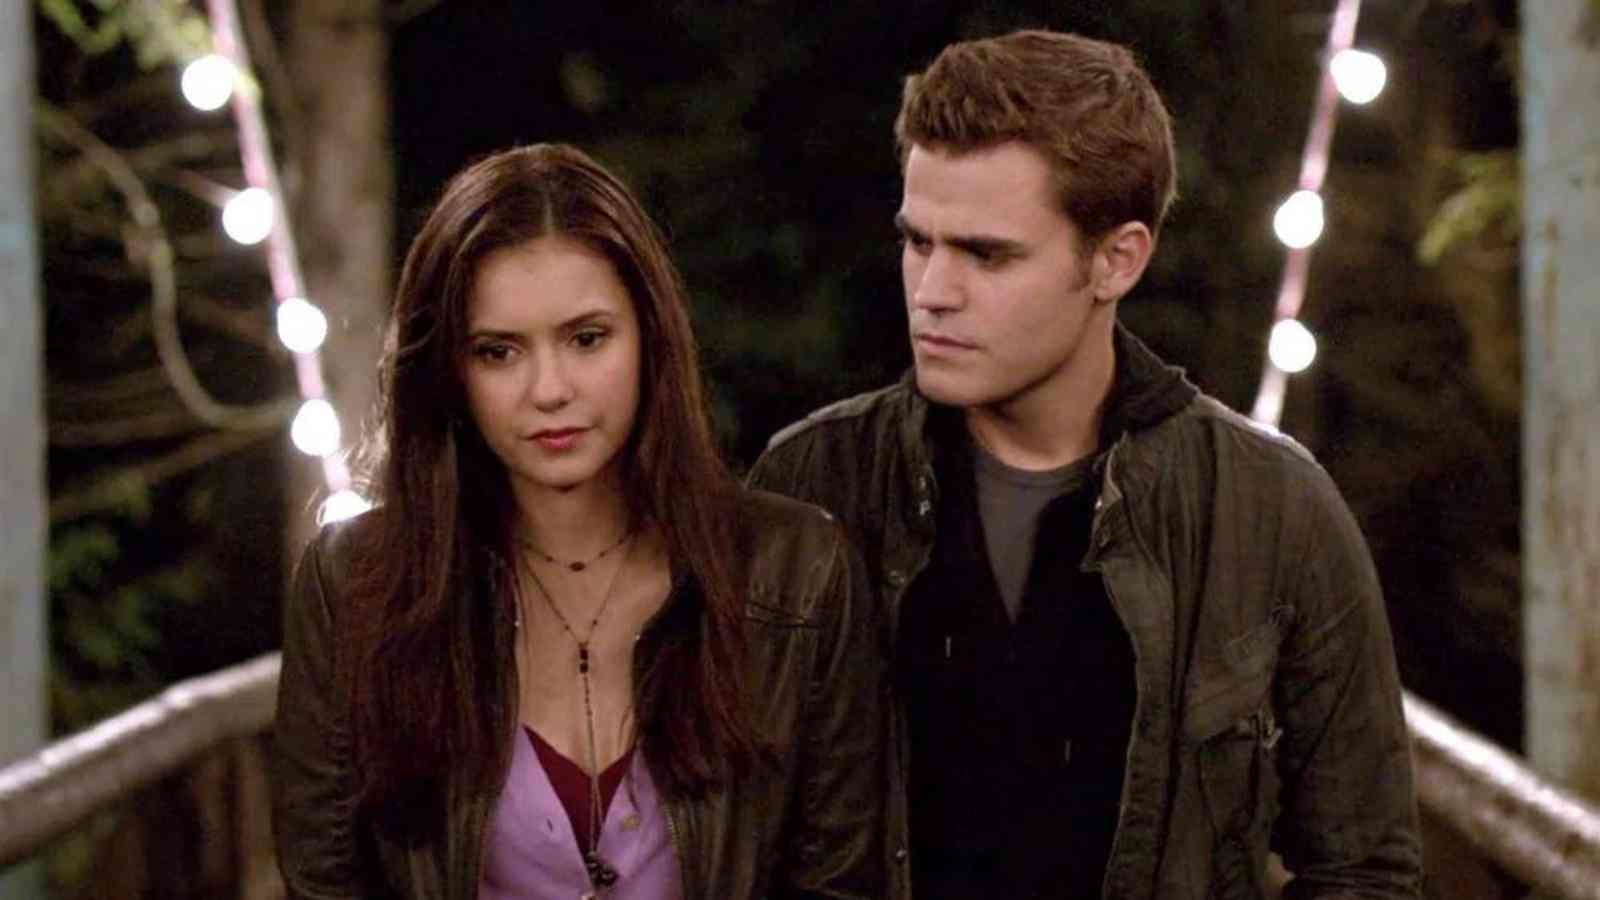 You can watch The Vampire Diaries on HBO Max as it leaves Netflix